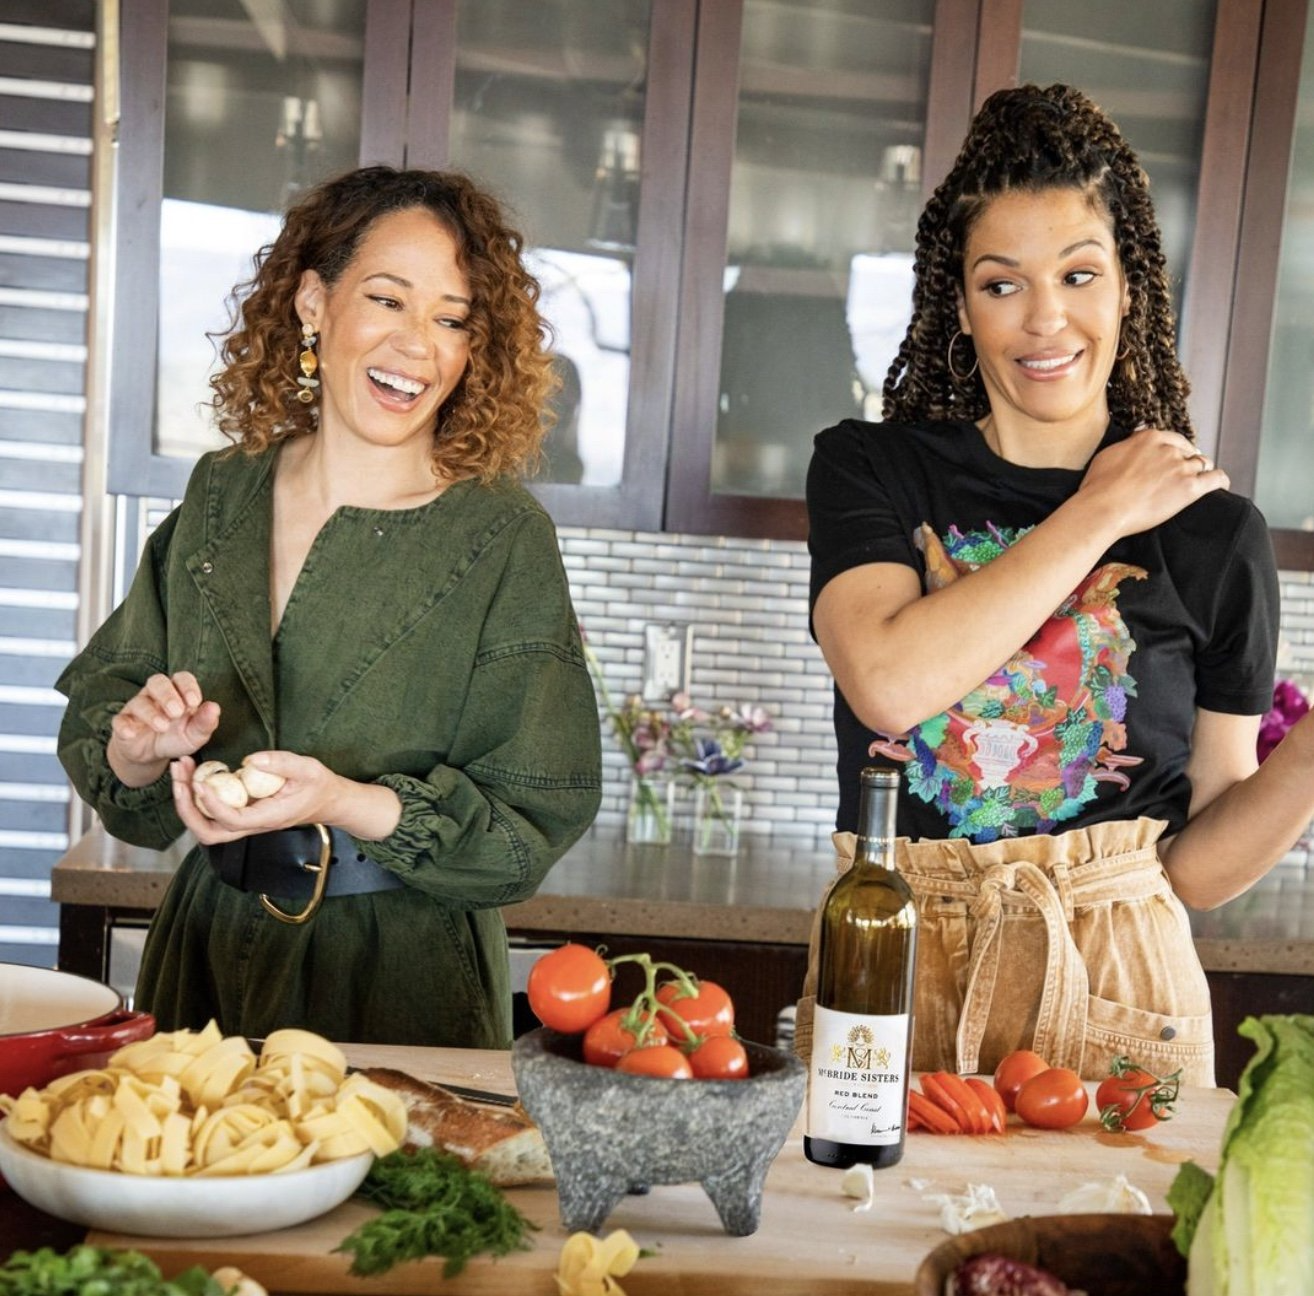 An image of Robin and Andréa McBride laughing together while preparing food at a wooden table.